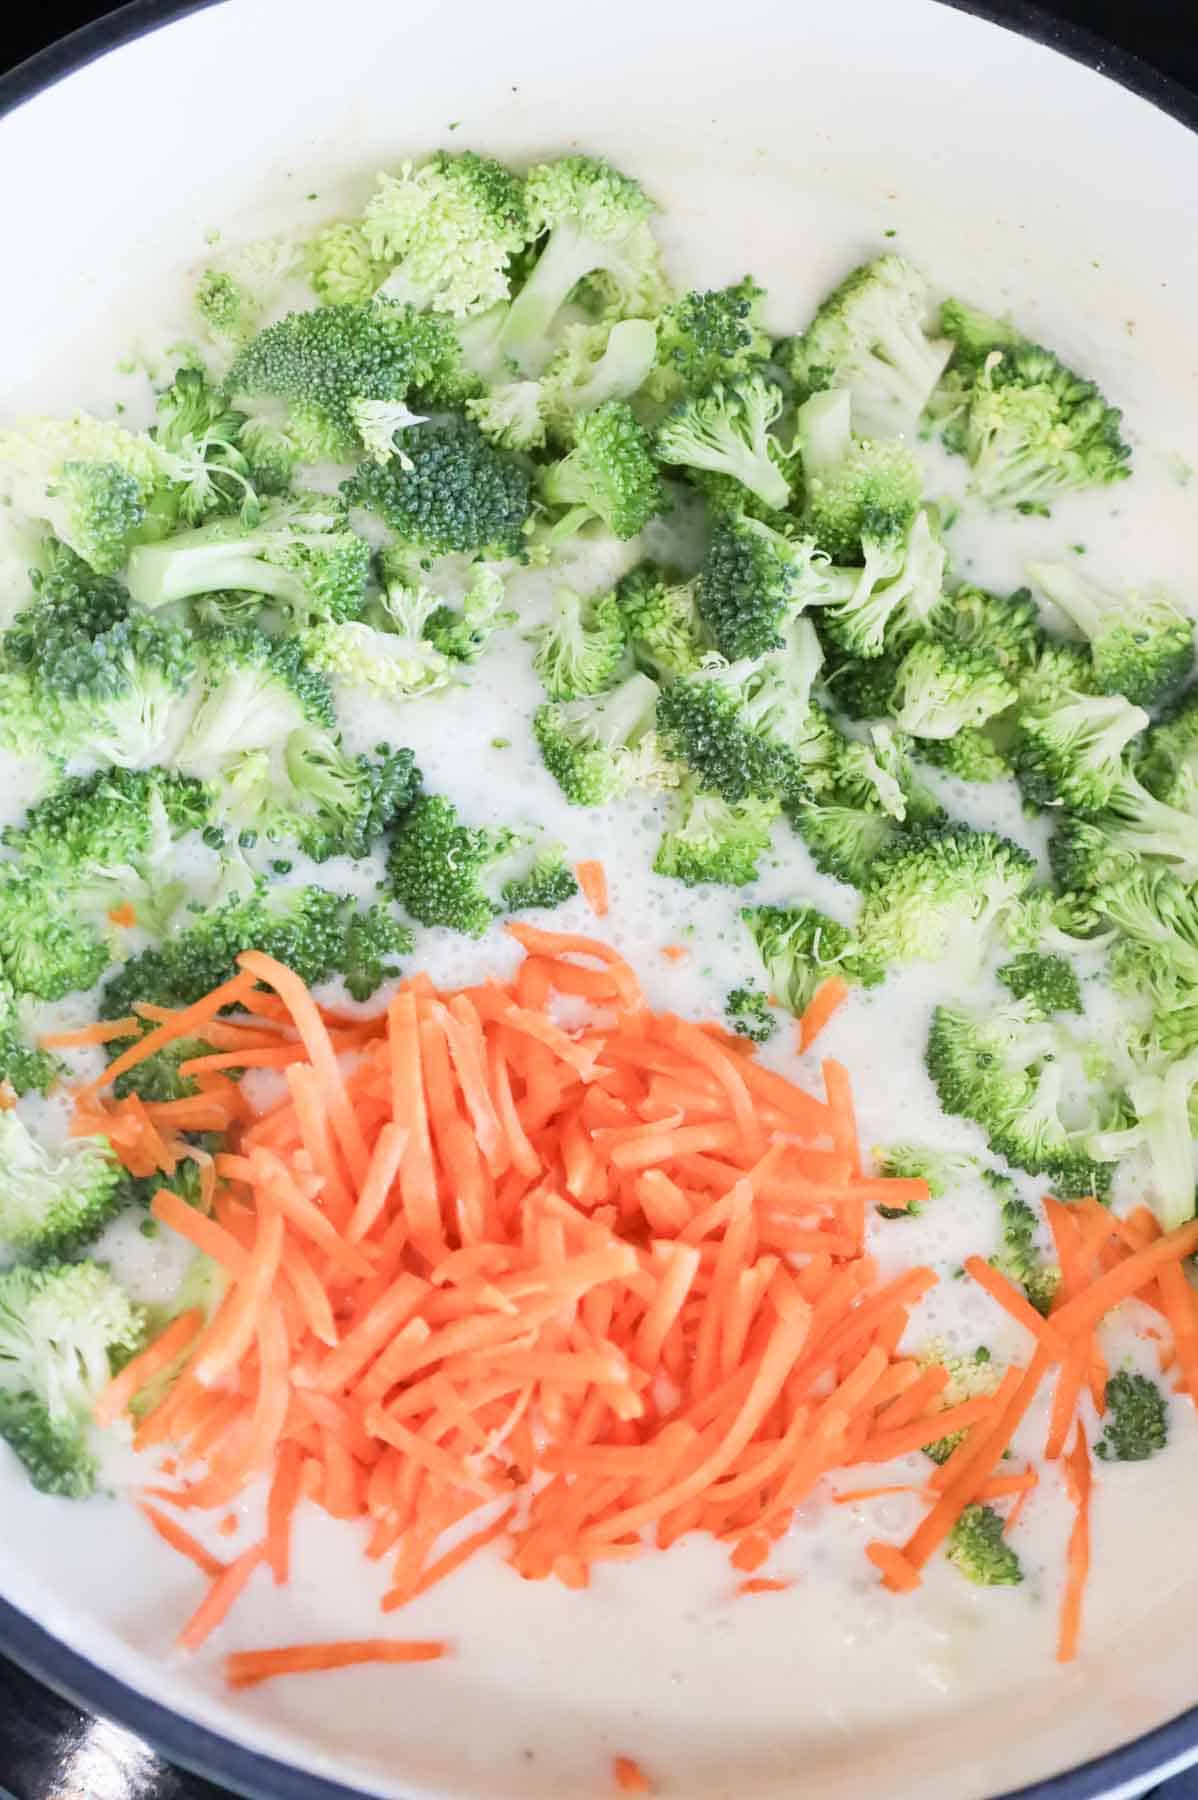 broccoli florets and shredded carrots added to pot with creamy broth mixture